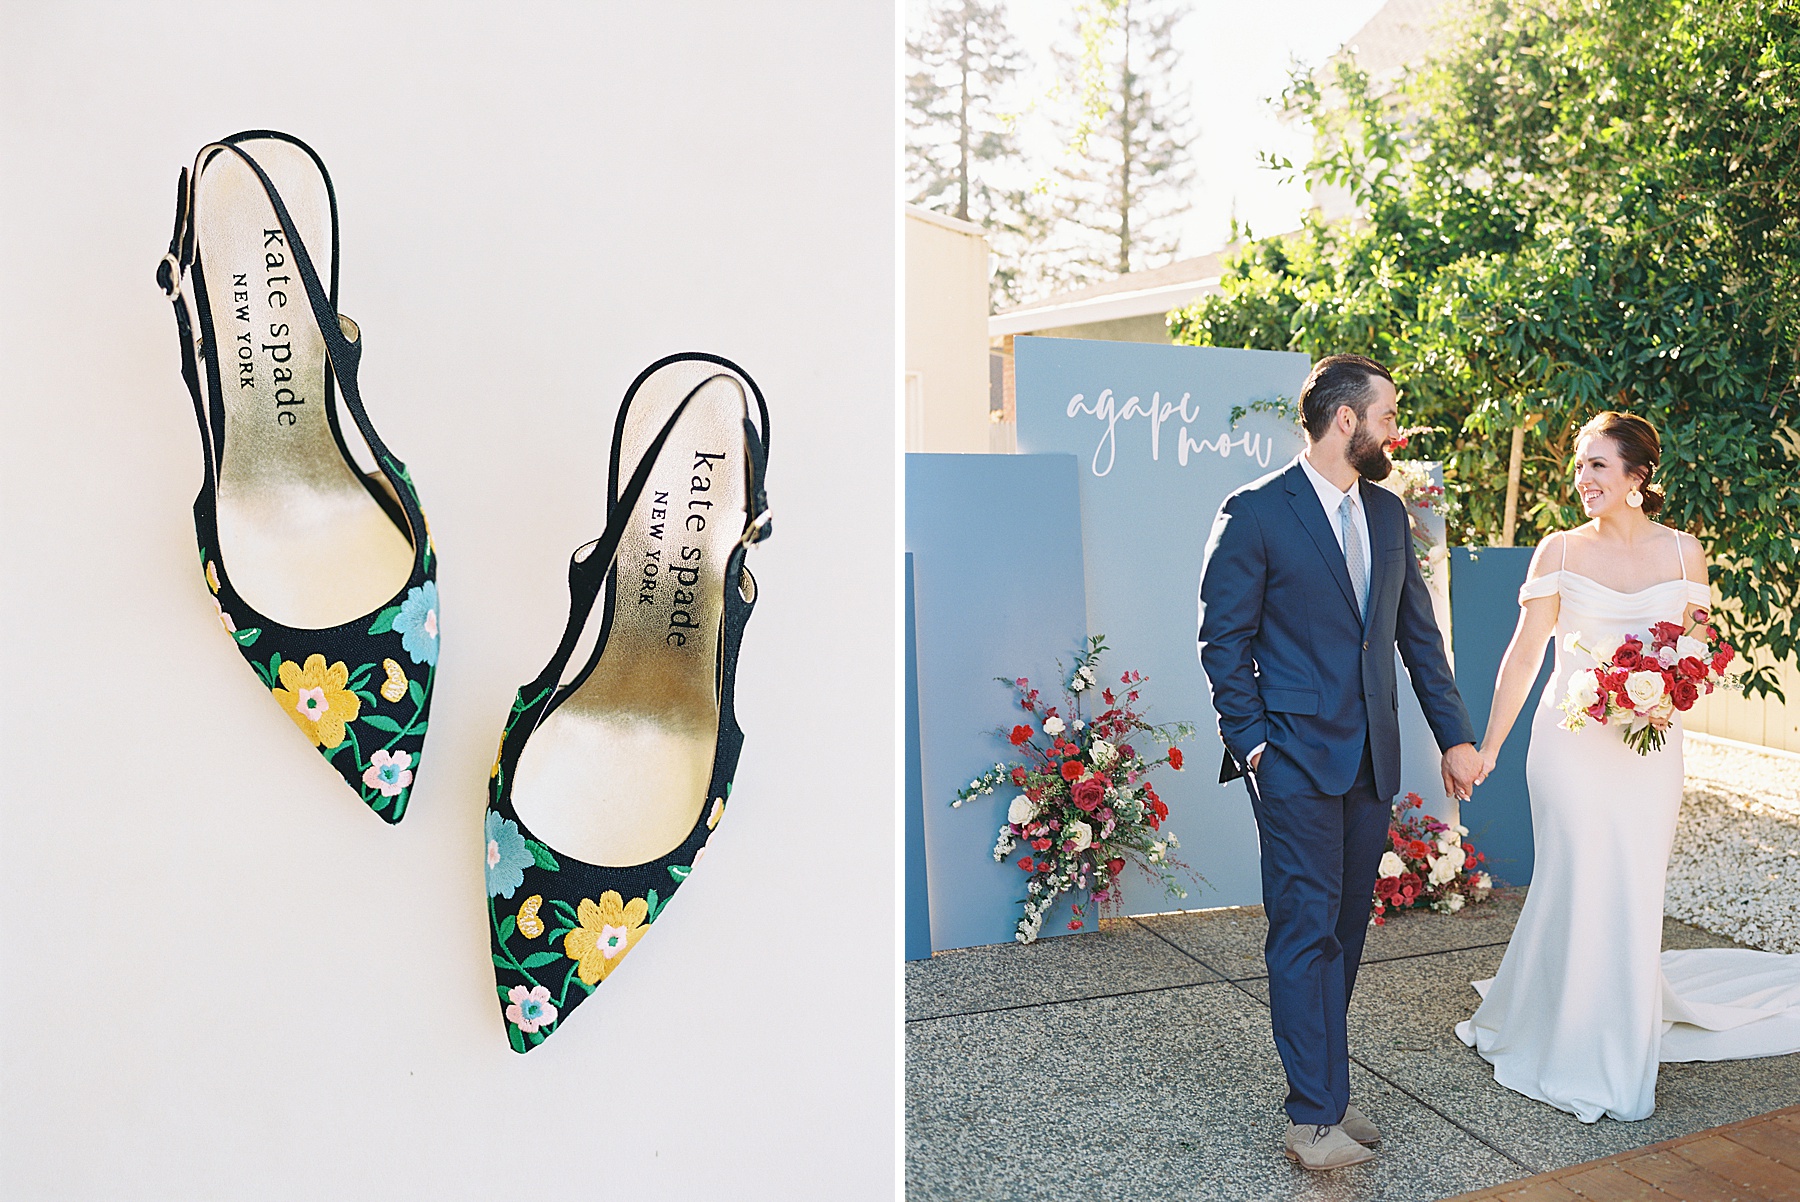 Grecian Inspired Micro-Wedding with Events by Kristina Elyse - Ash Baumgartner - Inspired by This - Sonoma Wedding Photographer_0039.jpg